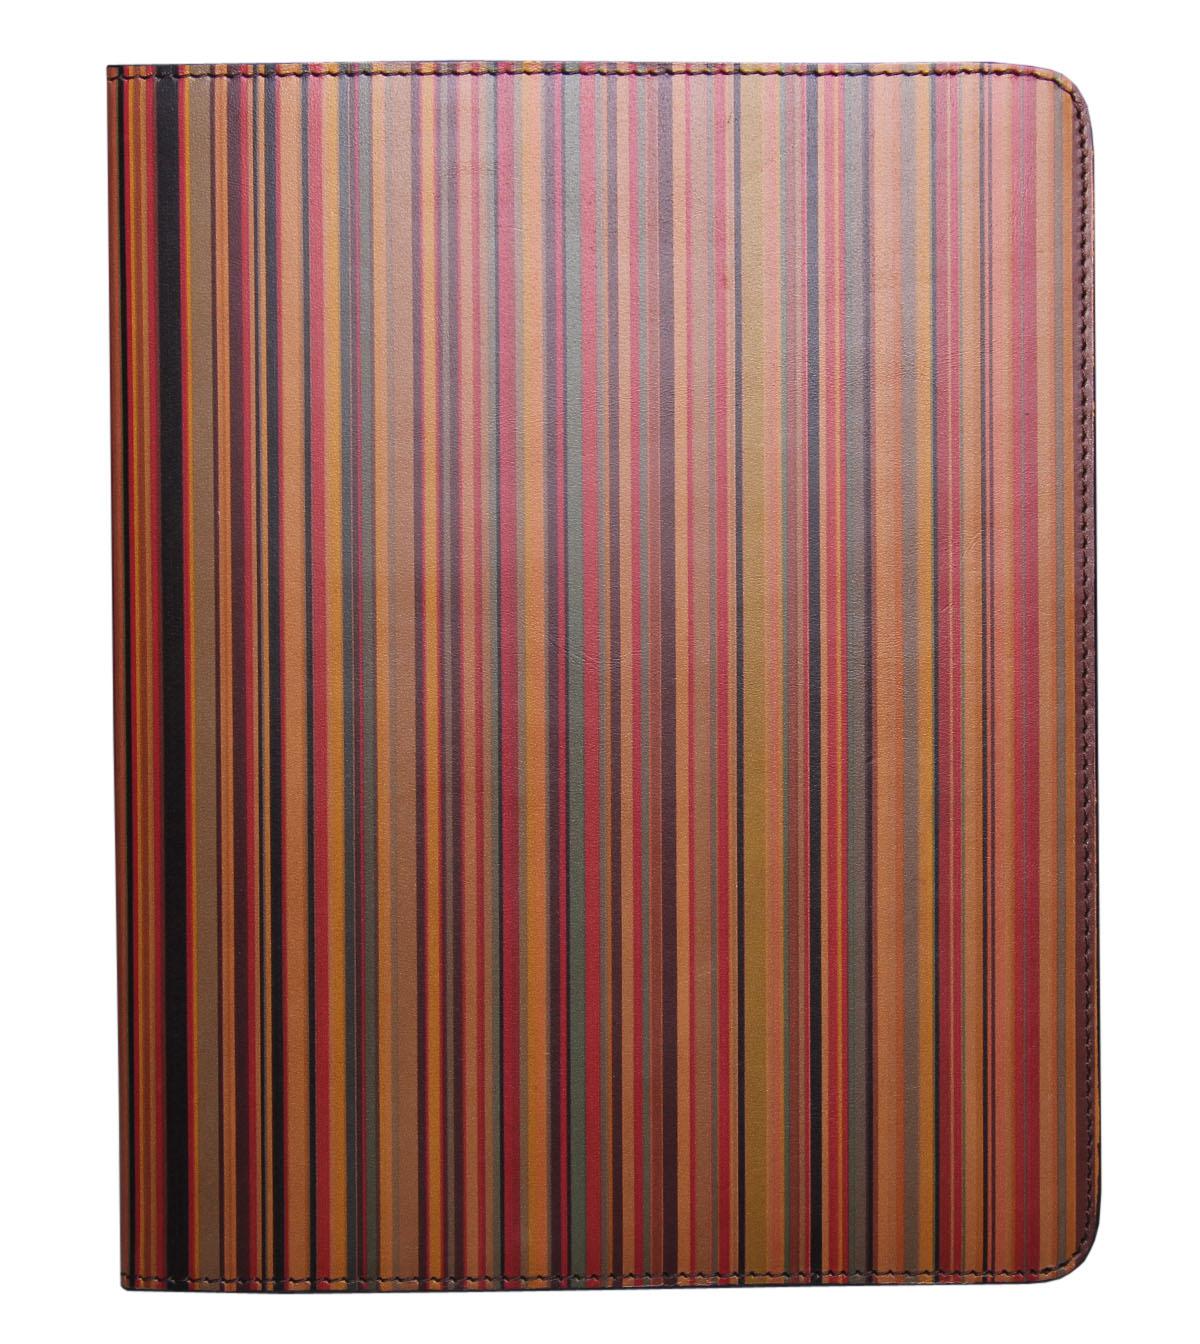 Foto Paul Smith Accessories Tablet Cover foto 161636